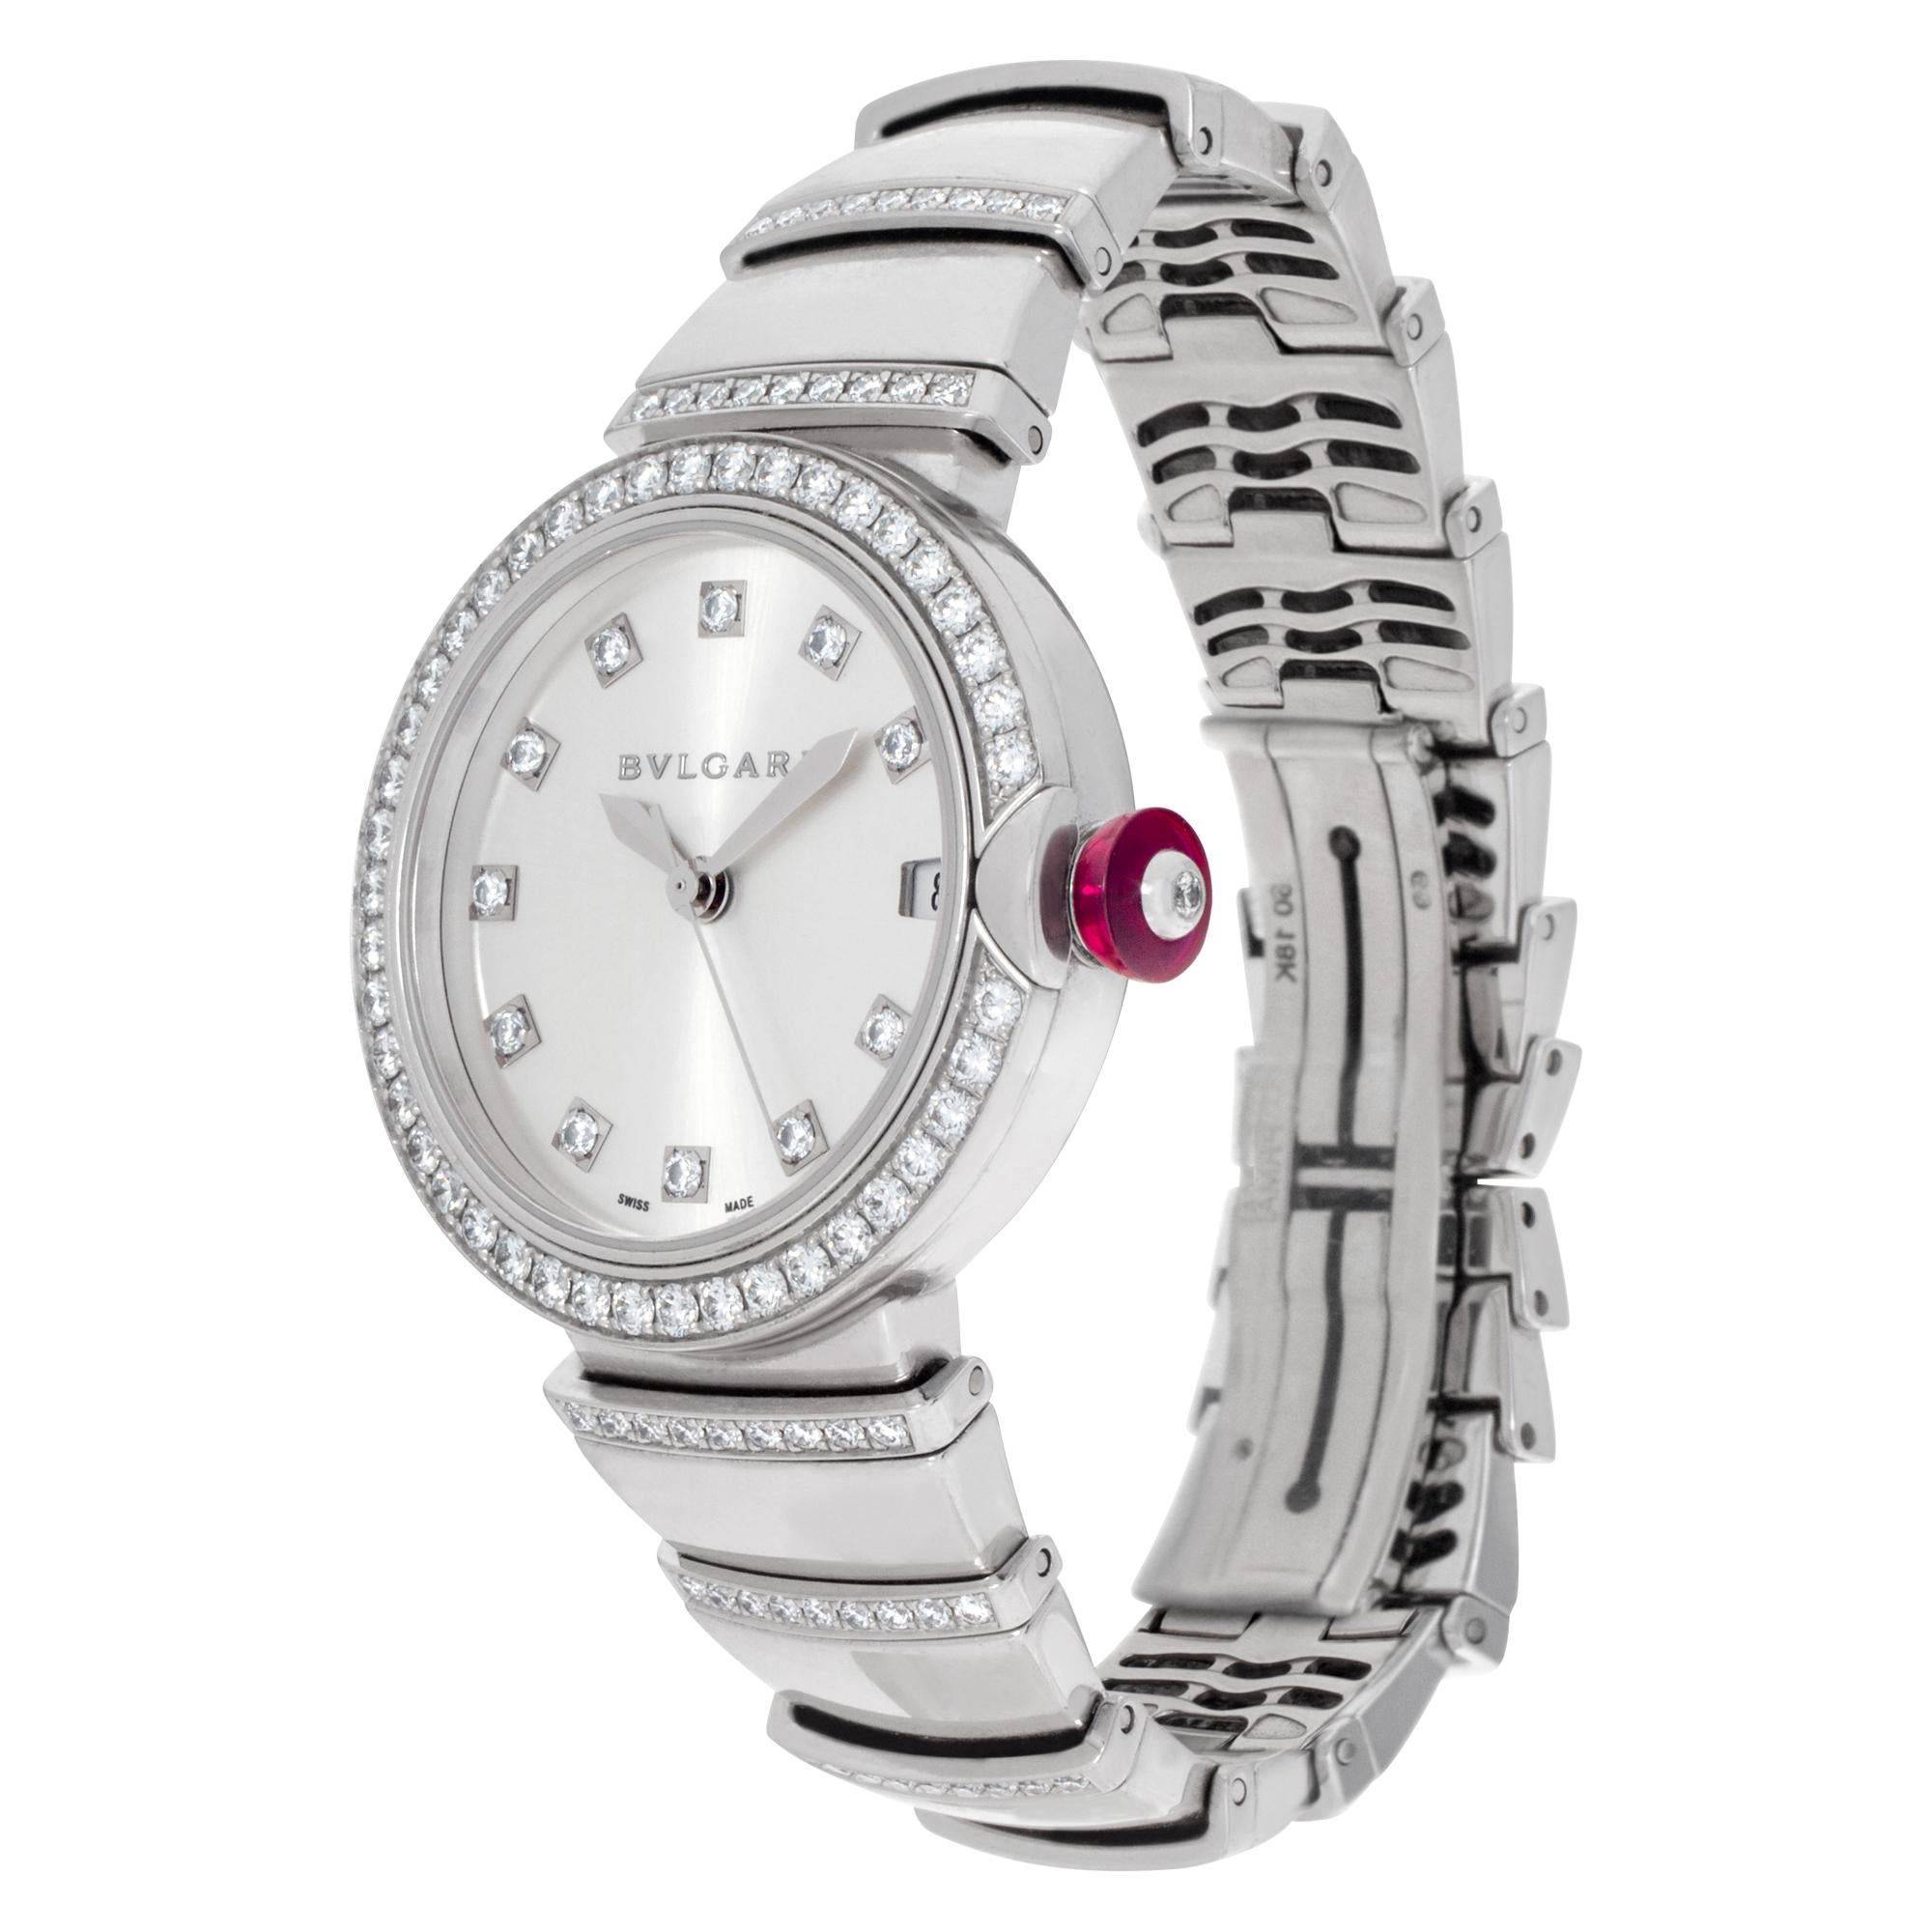 Bvlgari Lvcea in 18k white gold with original diamond bezel, diamond dial and diamond band. Auto w/ sweep seconds and date. 33 mm case size. Fits princess 6.25 inches wrist. Ref LU W 33 G. Fine Pre-owned Bvlgari / Bulgari Watch.

Certified preowned